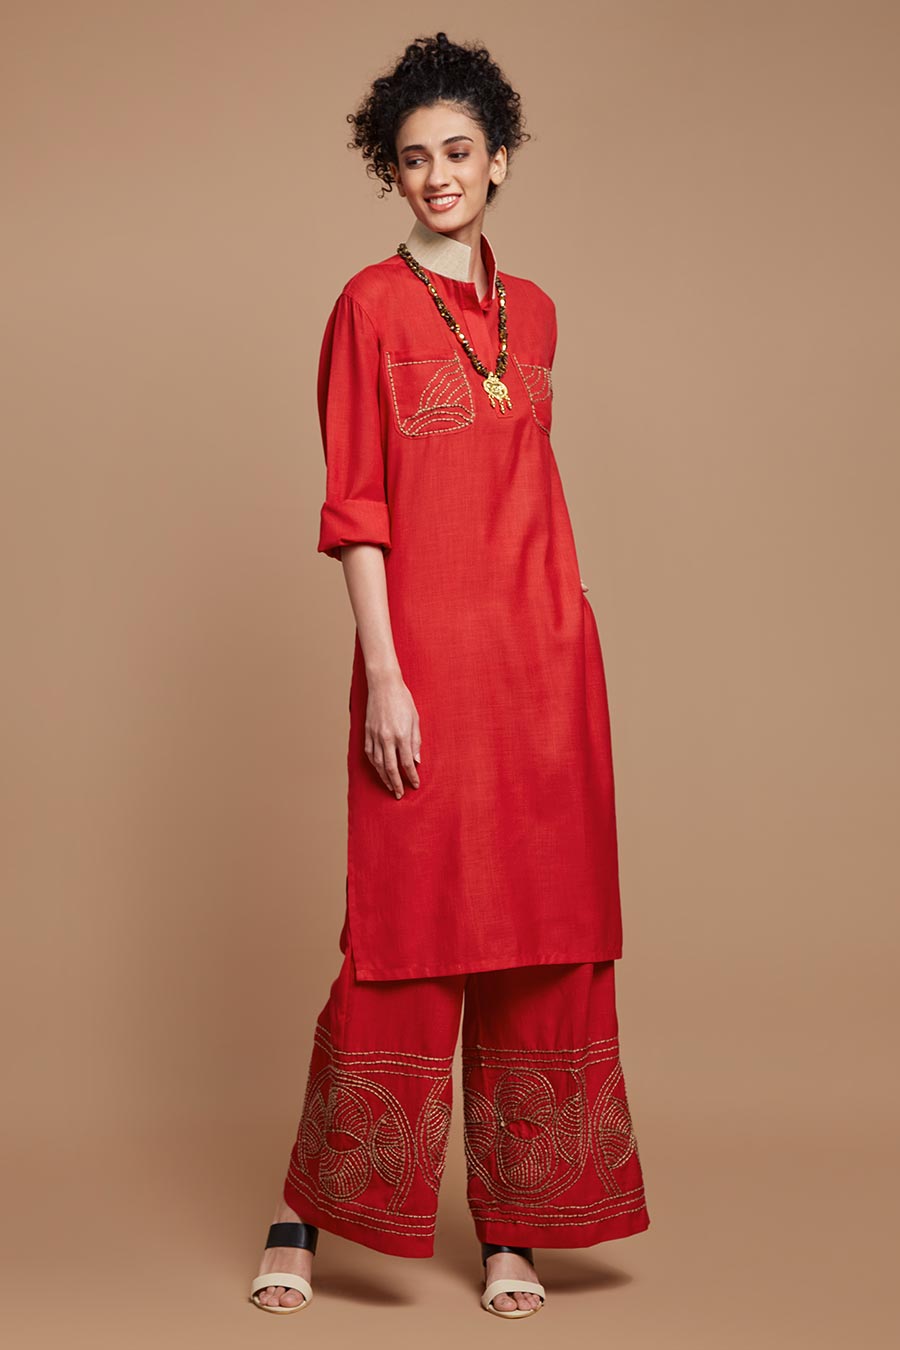 Red Jute Embroidered Wide Legged Pants